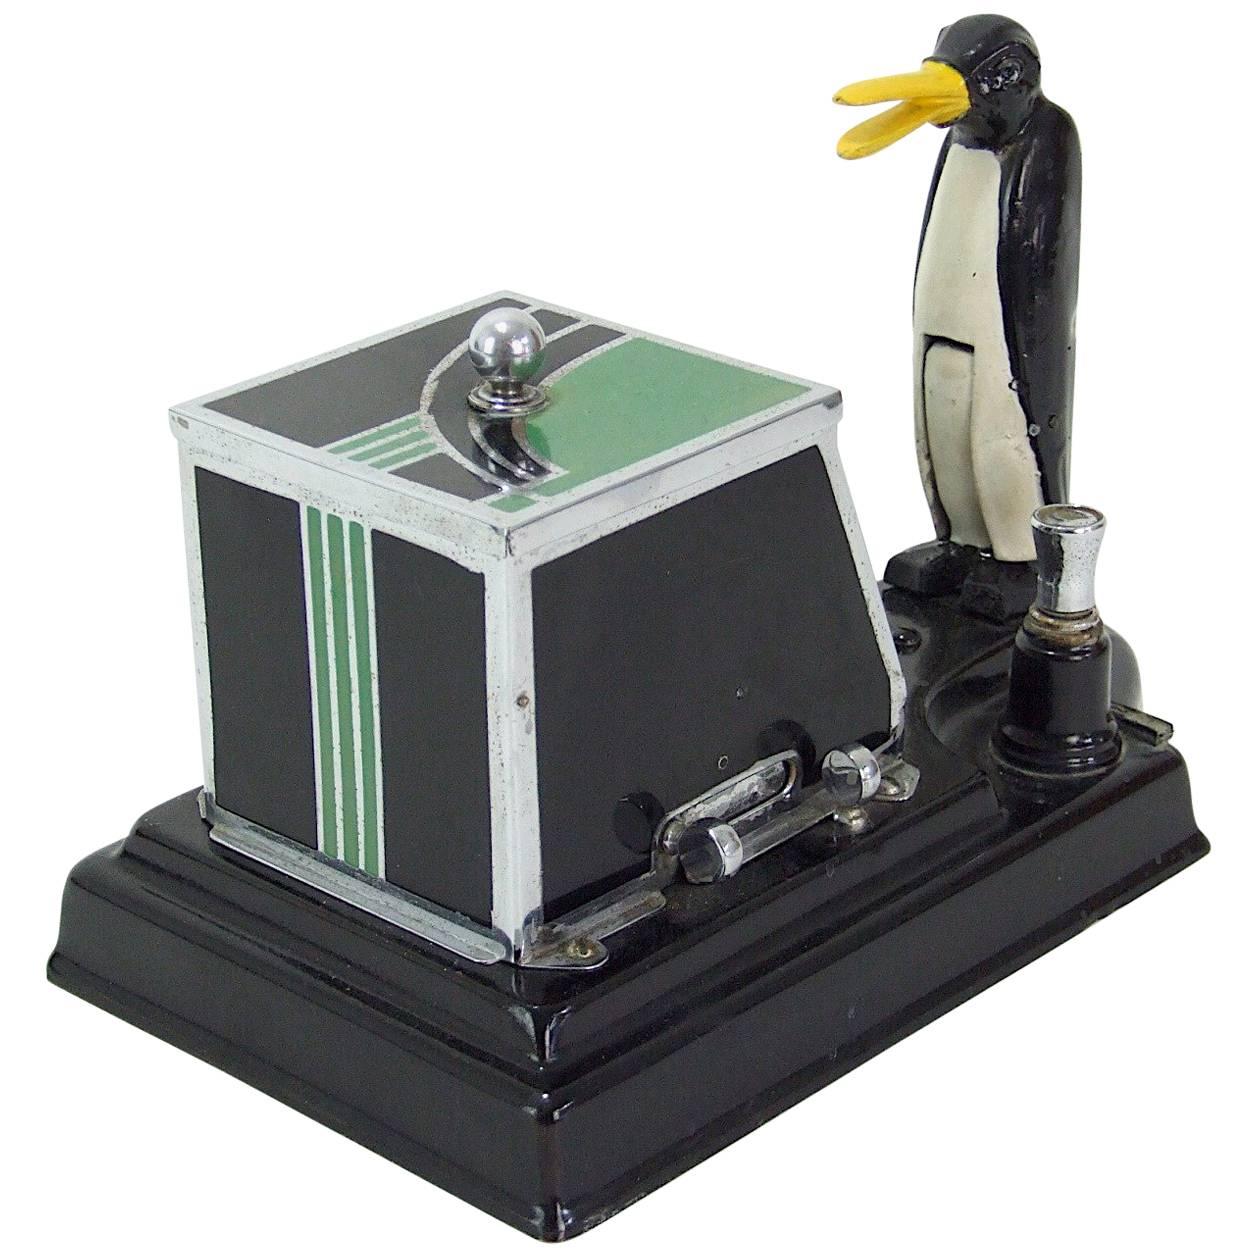 Pick-a-Cig Penguin Smokers Box For Sale